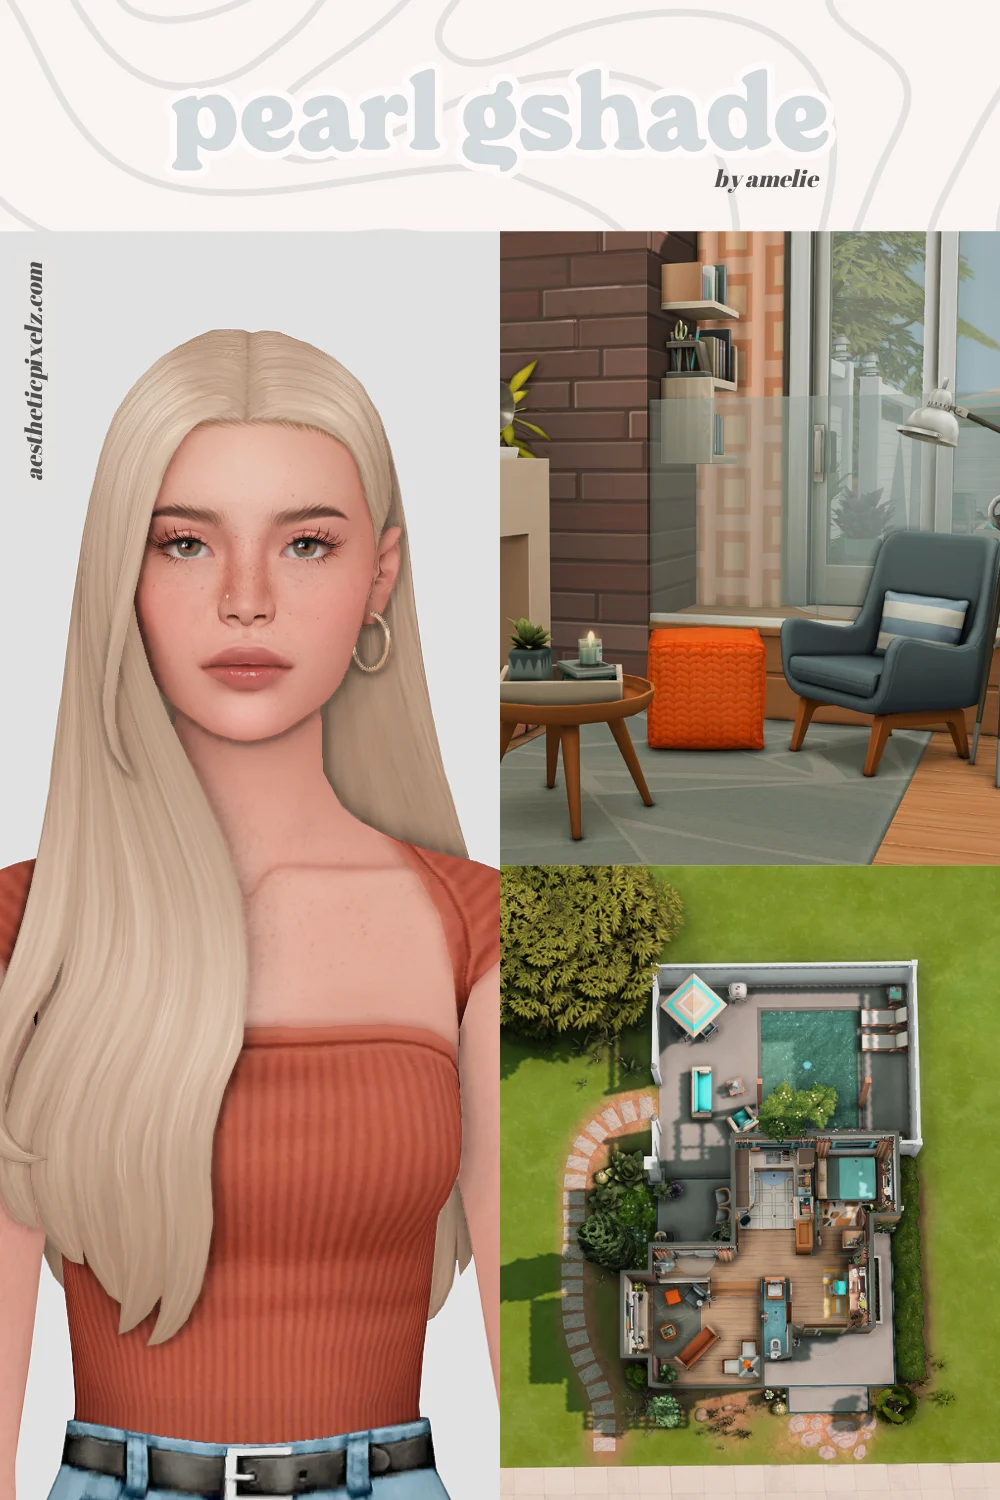 images showing off the pearl gshade for the sims 4